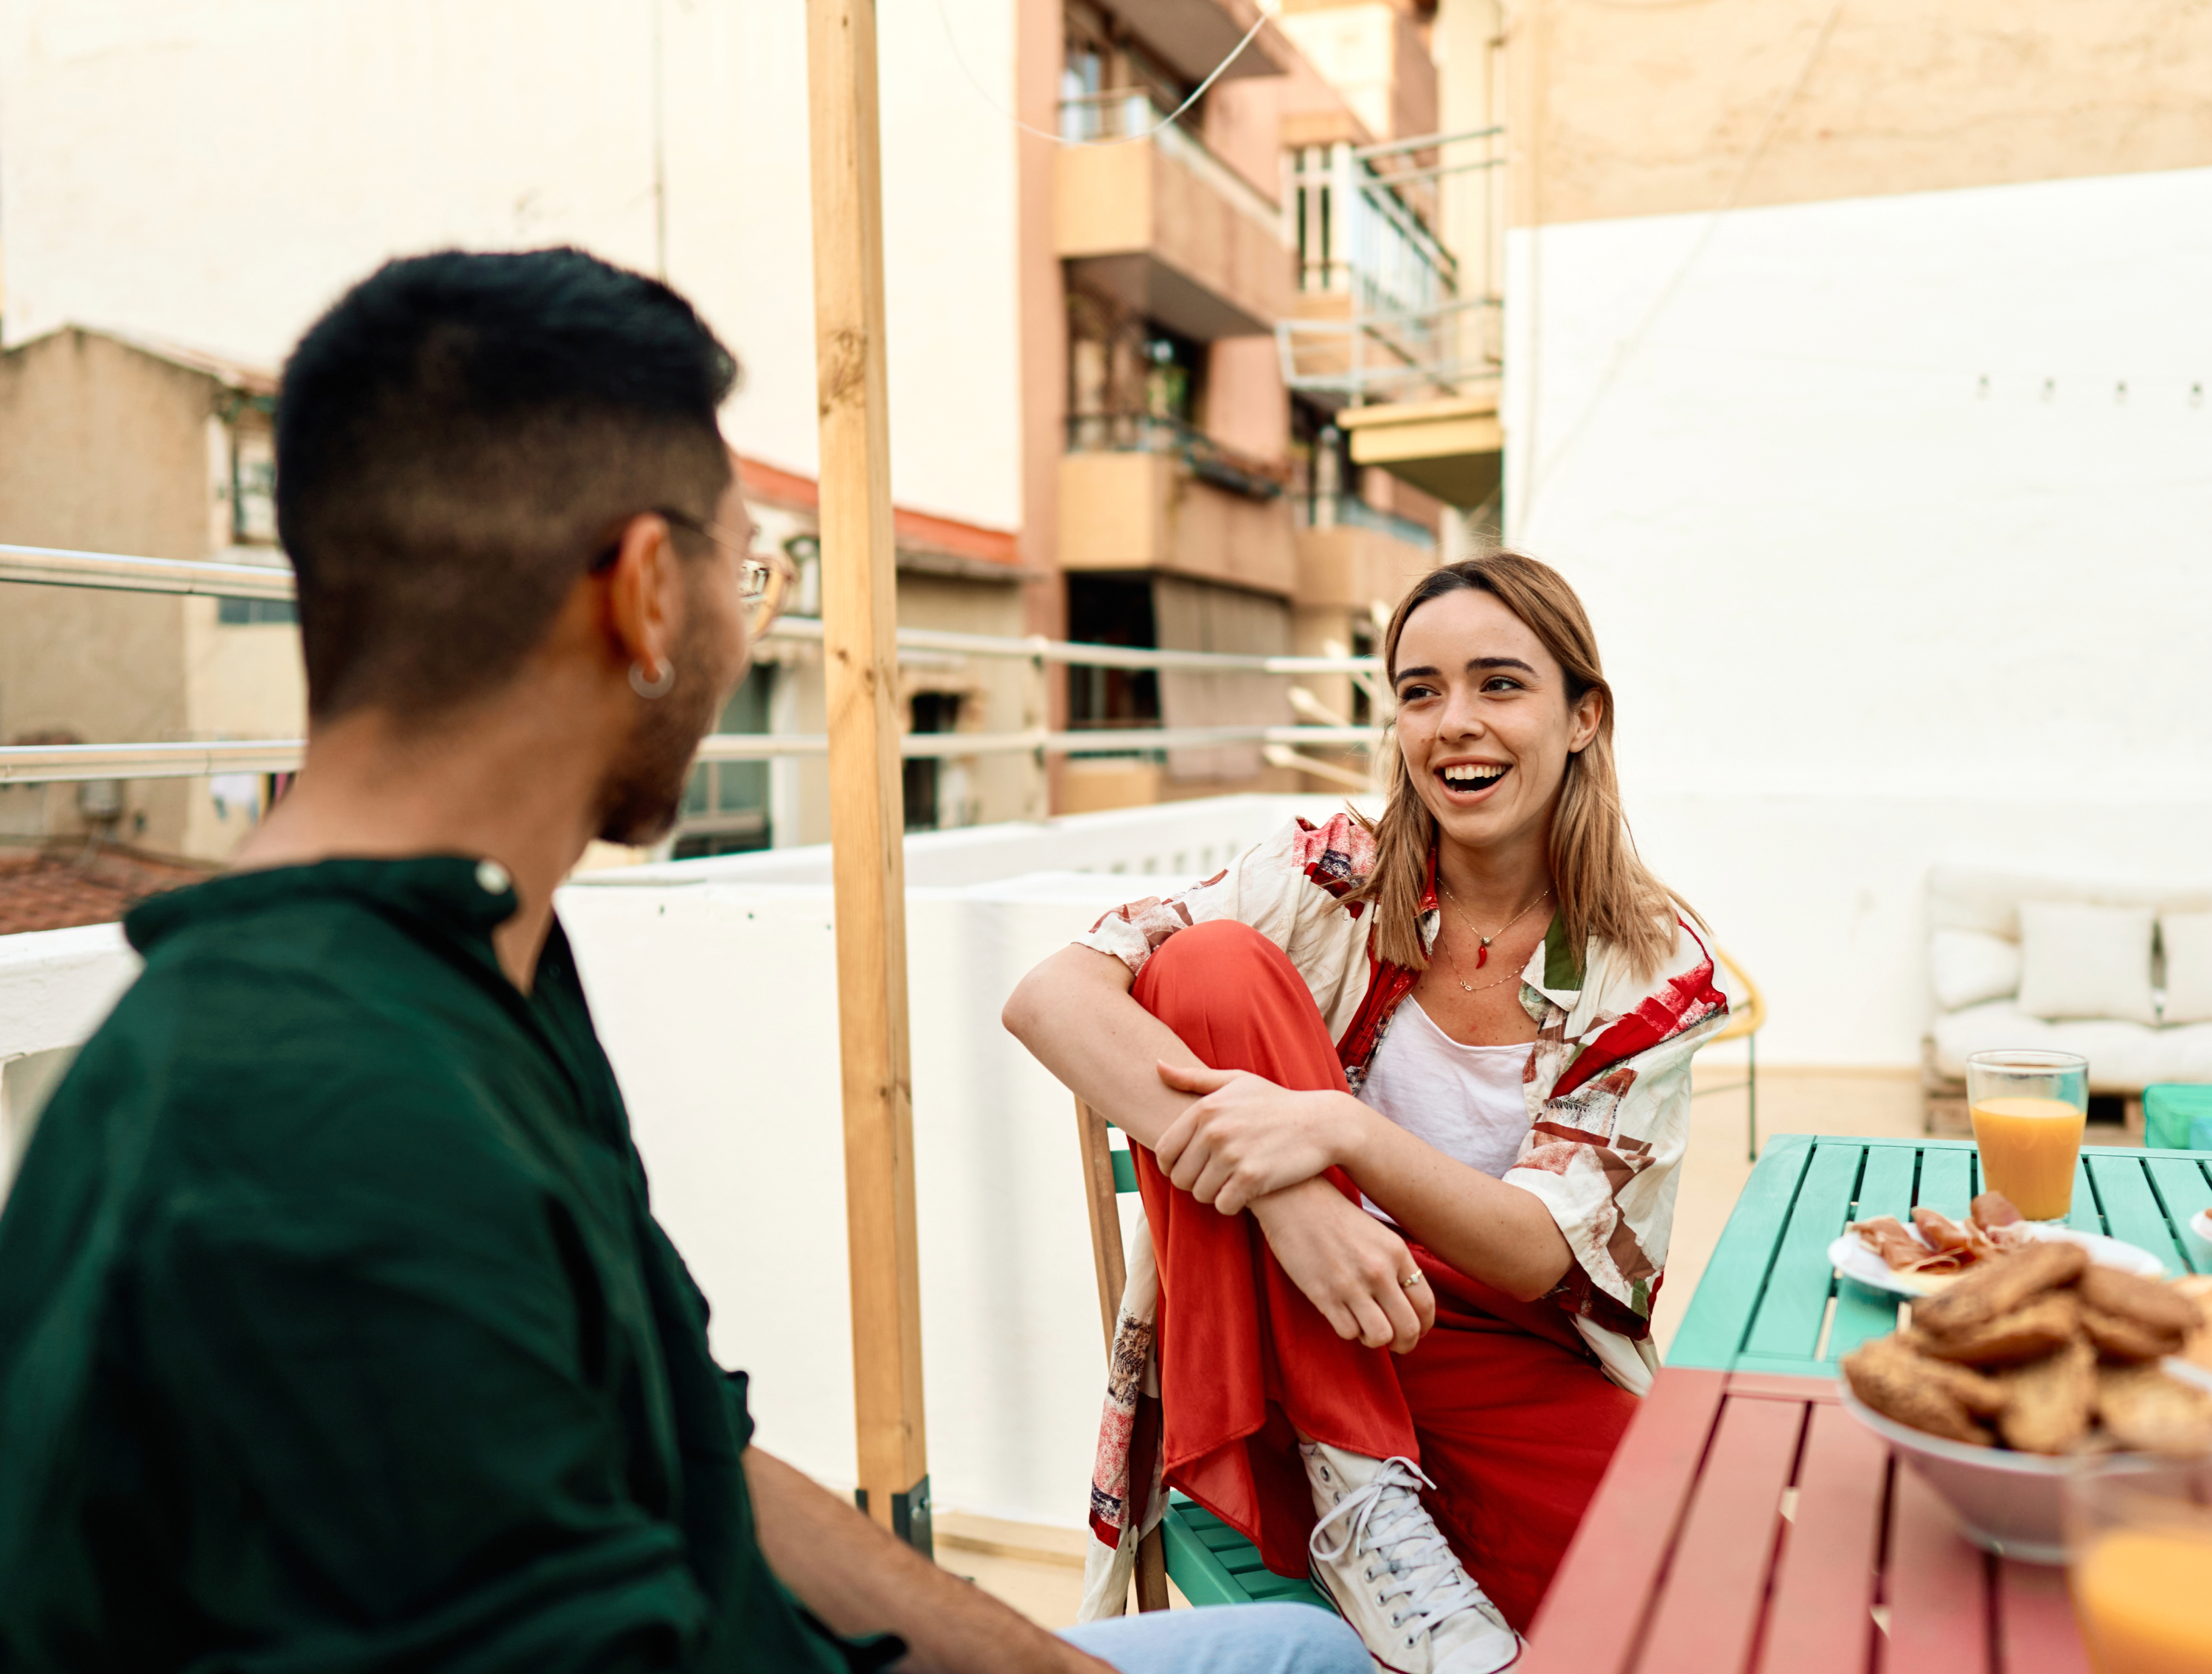 man and woman sitting in an outdoor urban setting, talking and laughing with each other